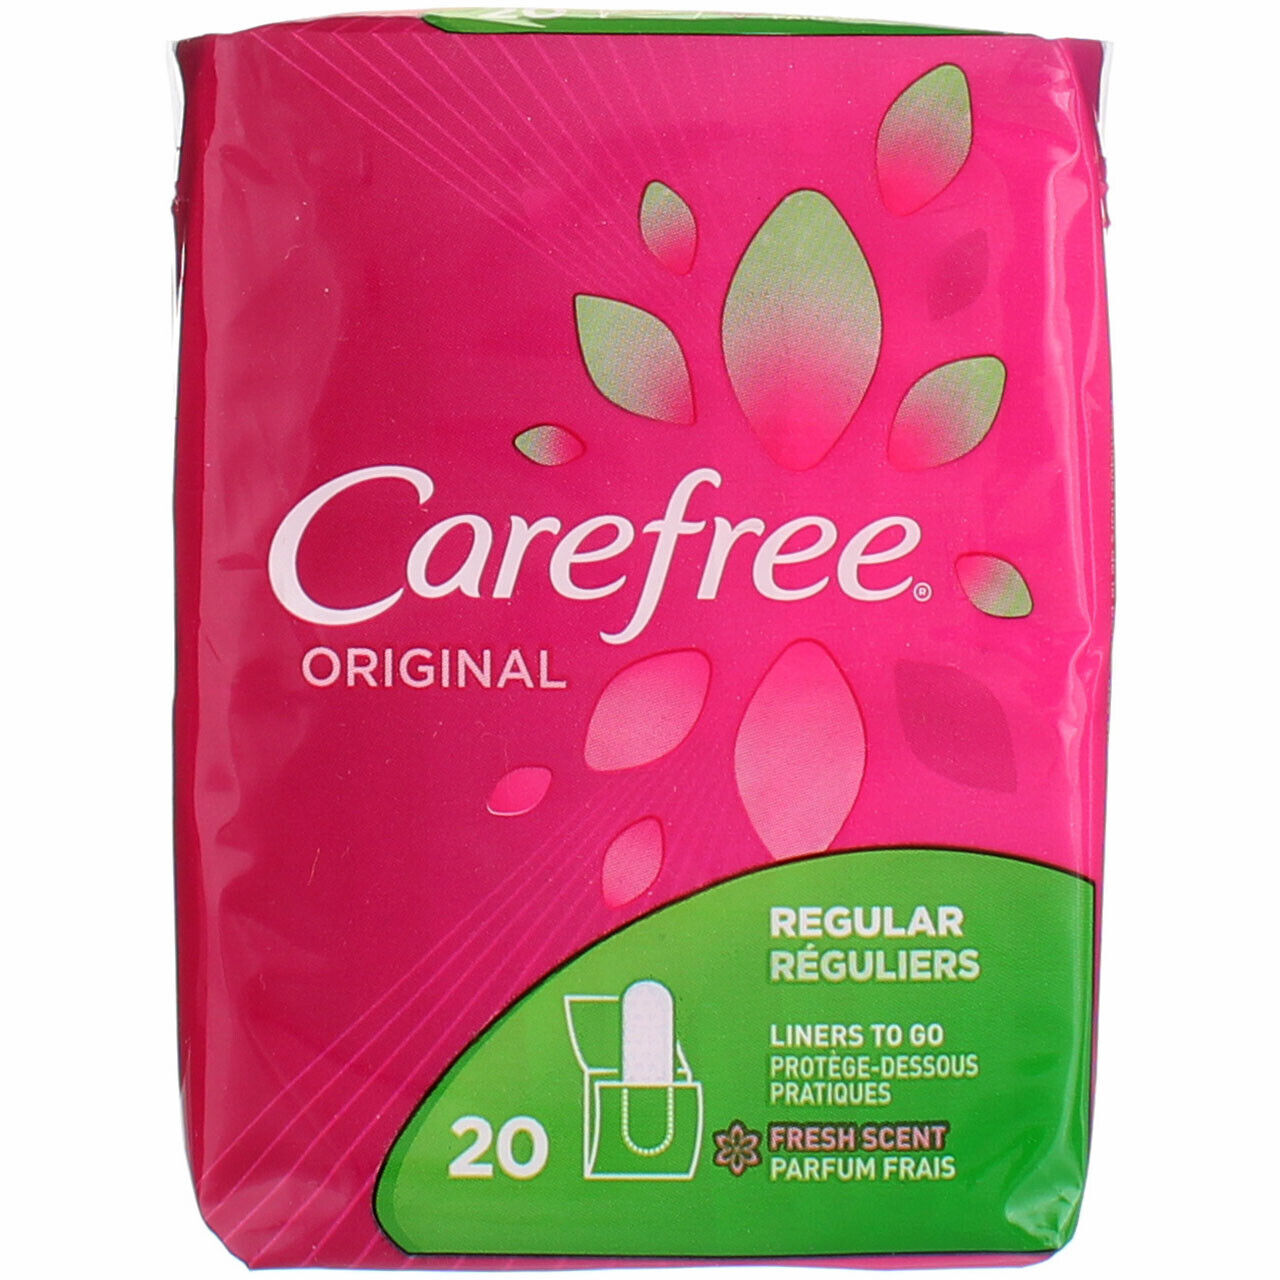 Carefree Original Liners, Regular, Wrapped, Fresh Scent, 20 Ct